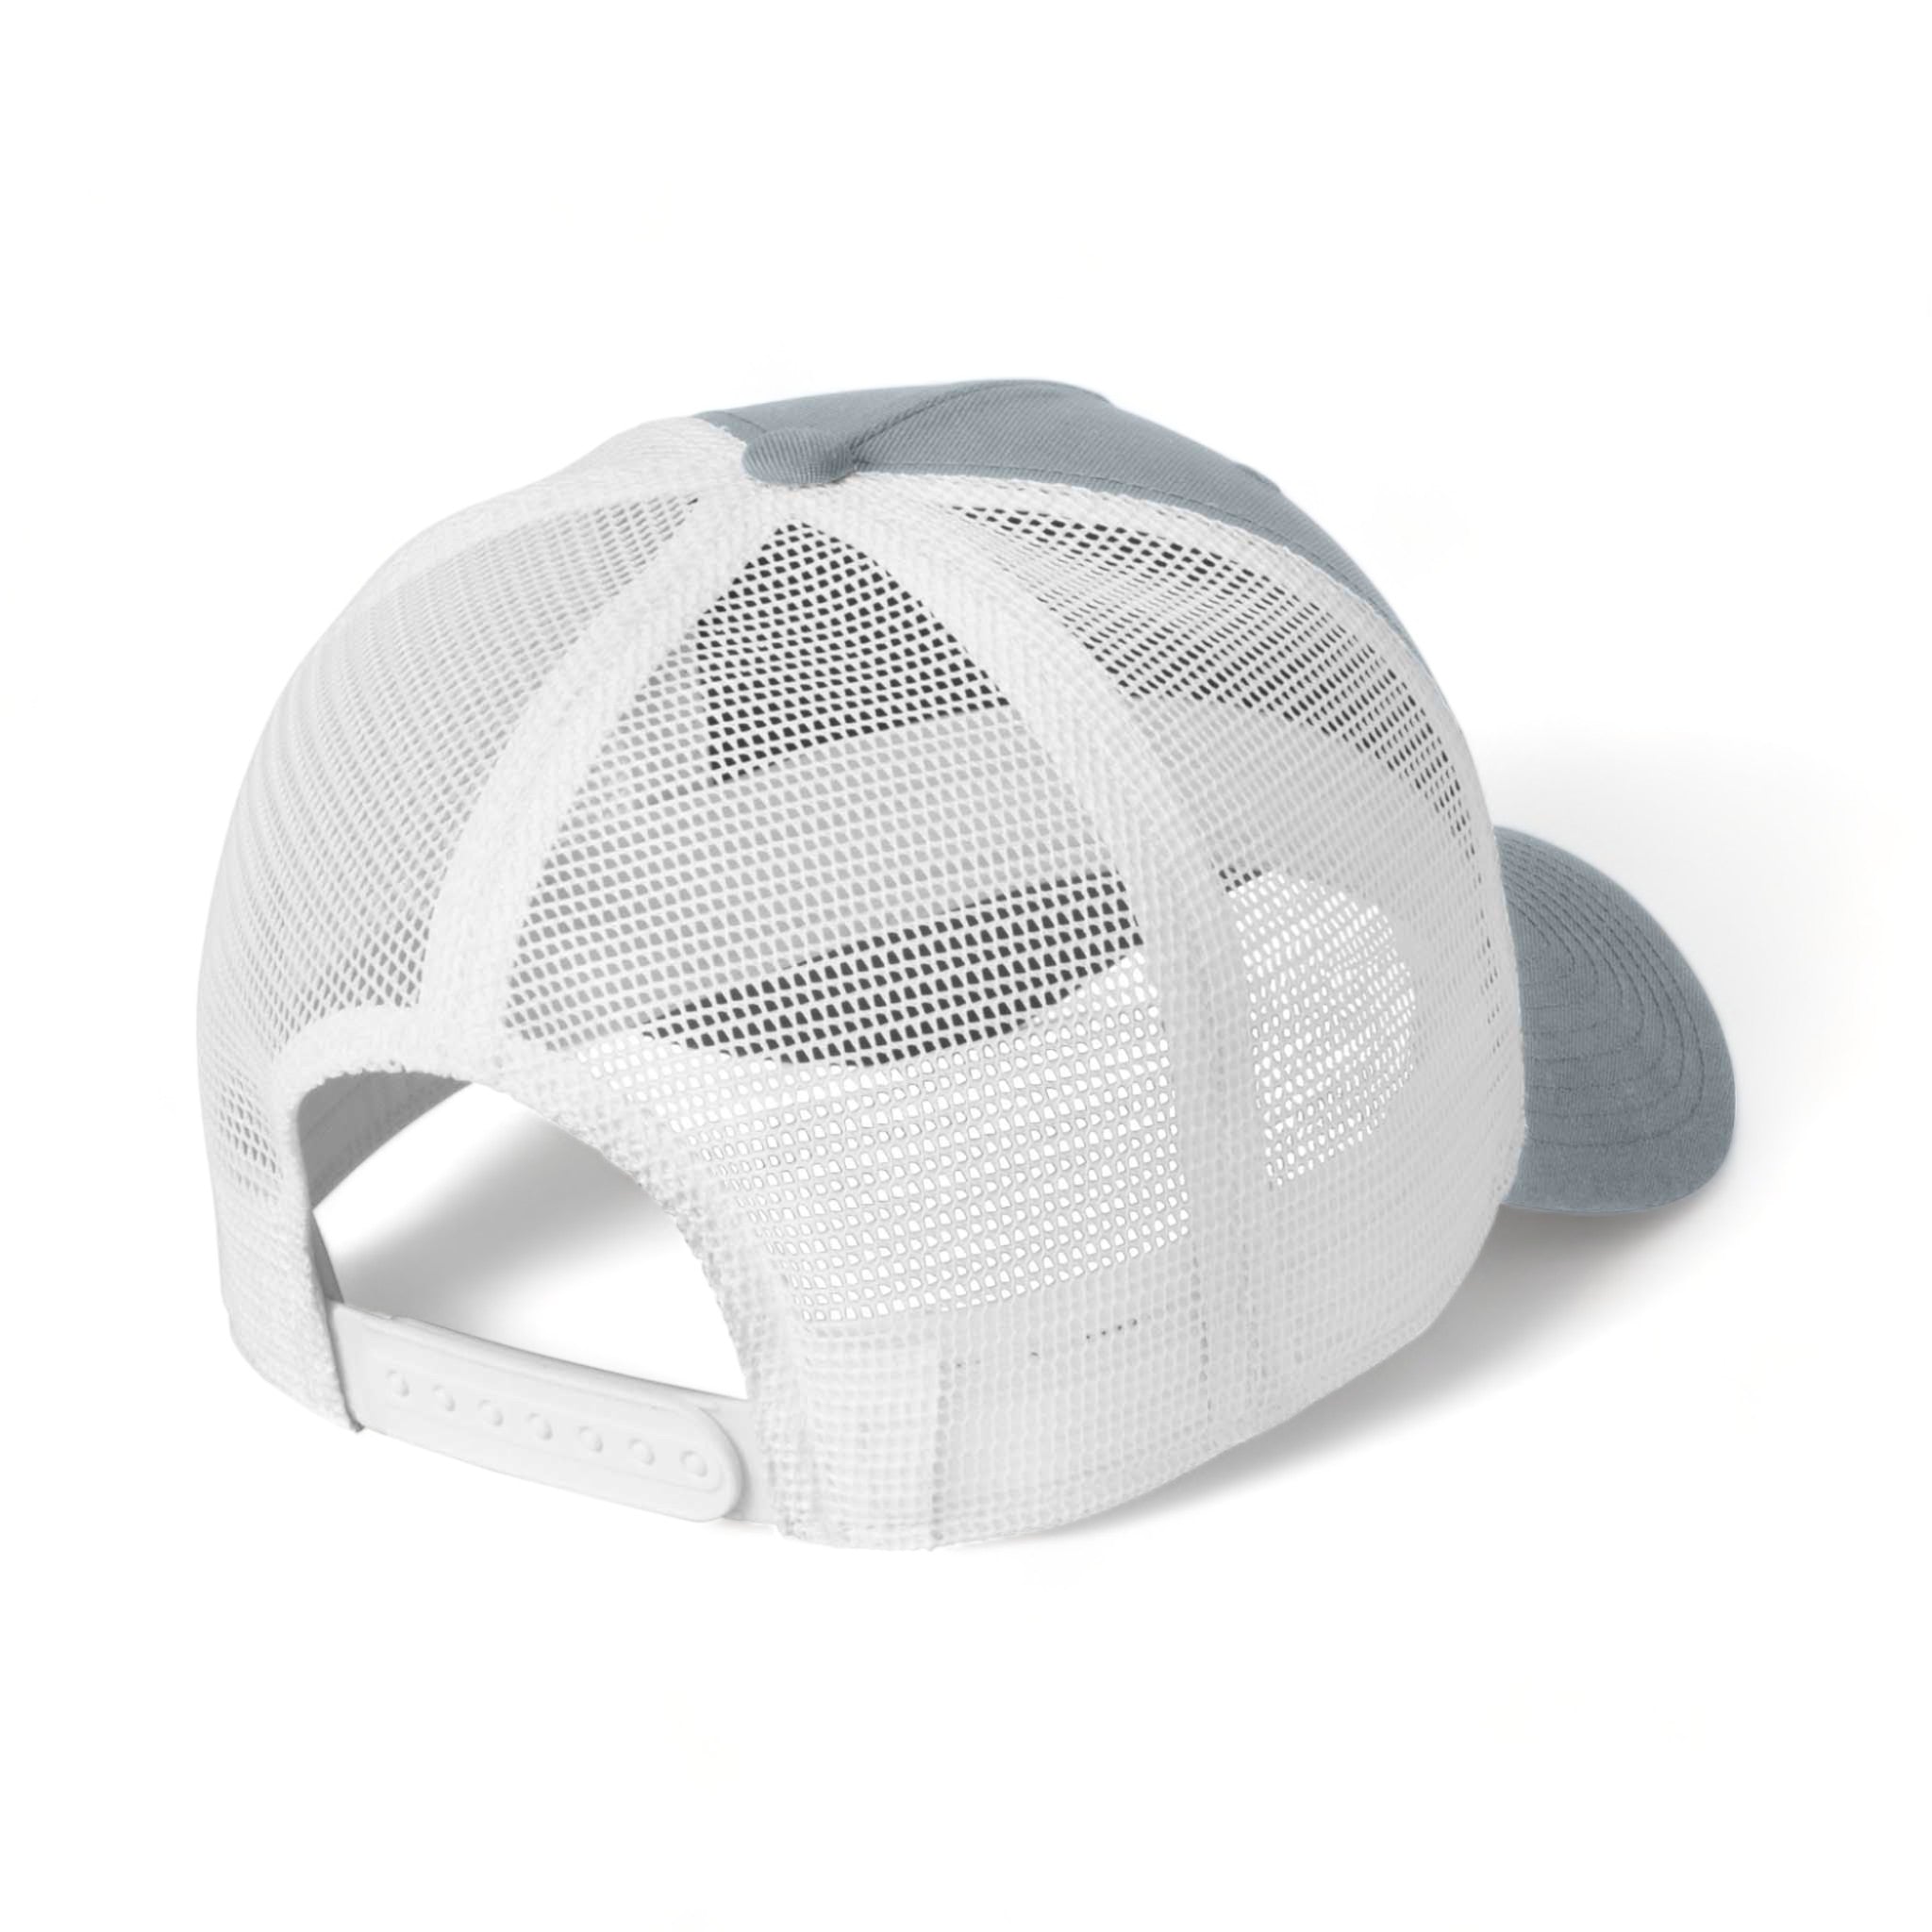 Back view of Nike NKFN9893 custom hat in cool grey and white